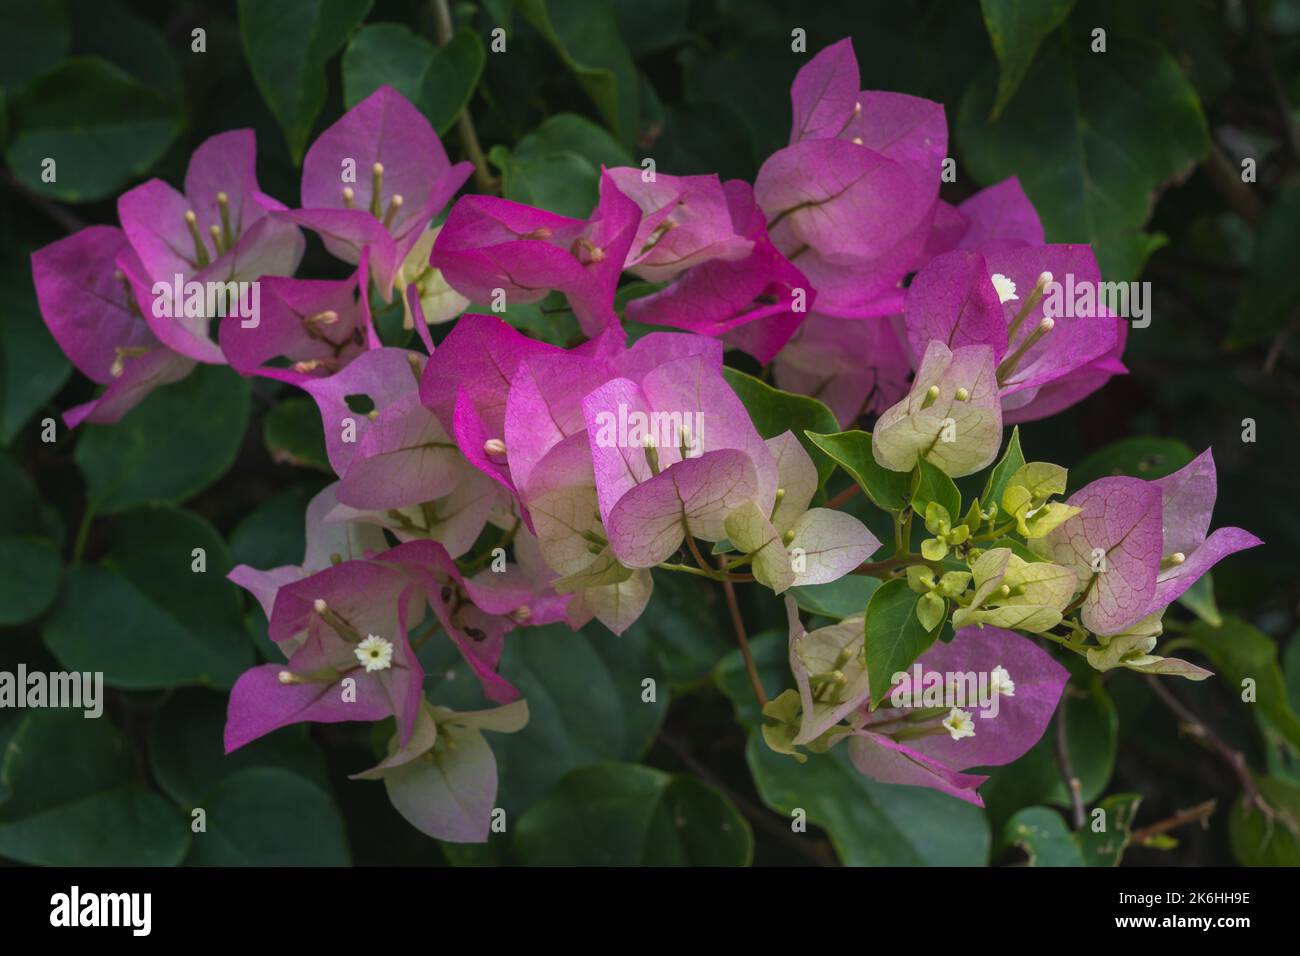 Closeup view of colorful pink and purple bracts and white flowers of tropical bougainvillea bush blooming outdoors Stock Photo